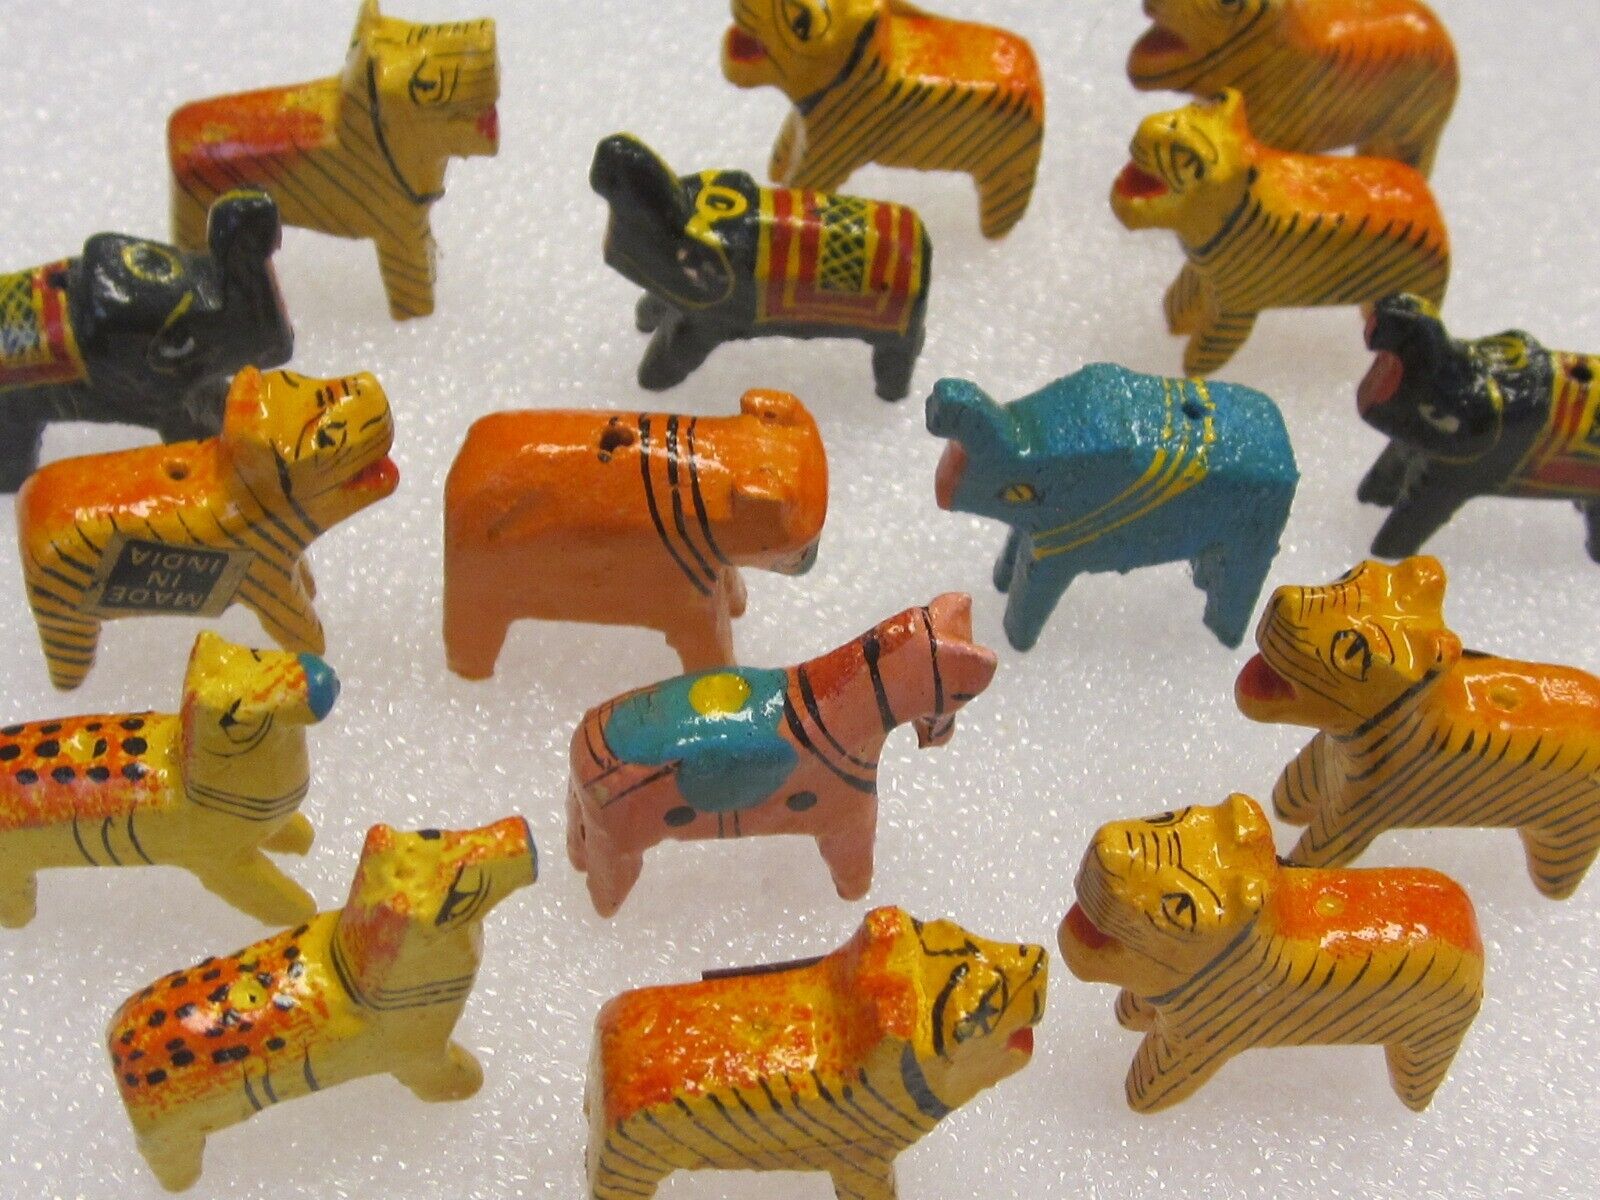 16 VTG BEADS ANIMAL 3-D INDIA WOOD HAND PAINTED JEWELRY FINDINGS LOT CRAFTS NOS